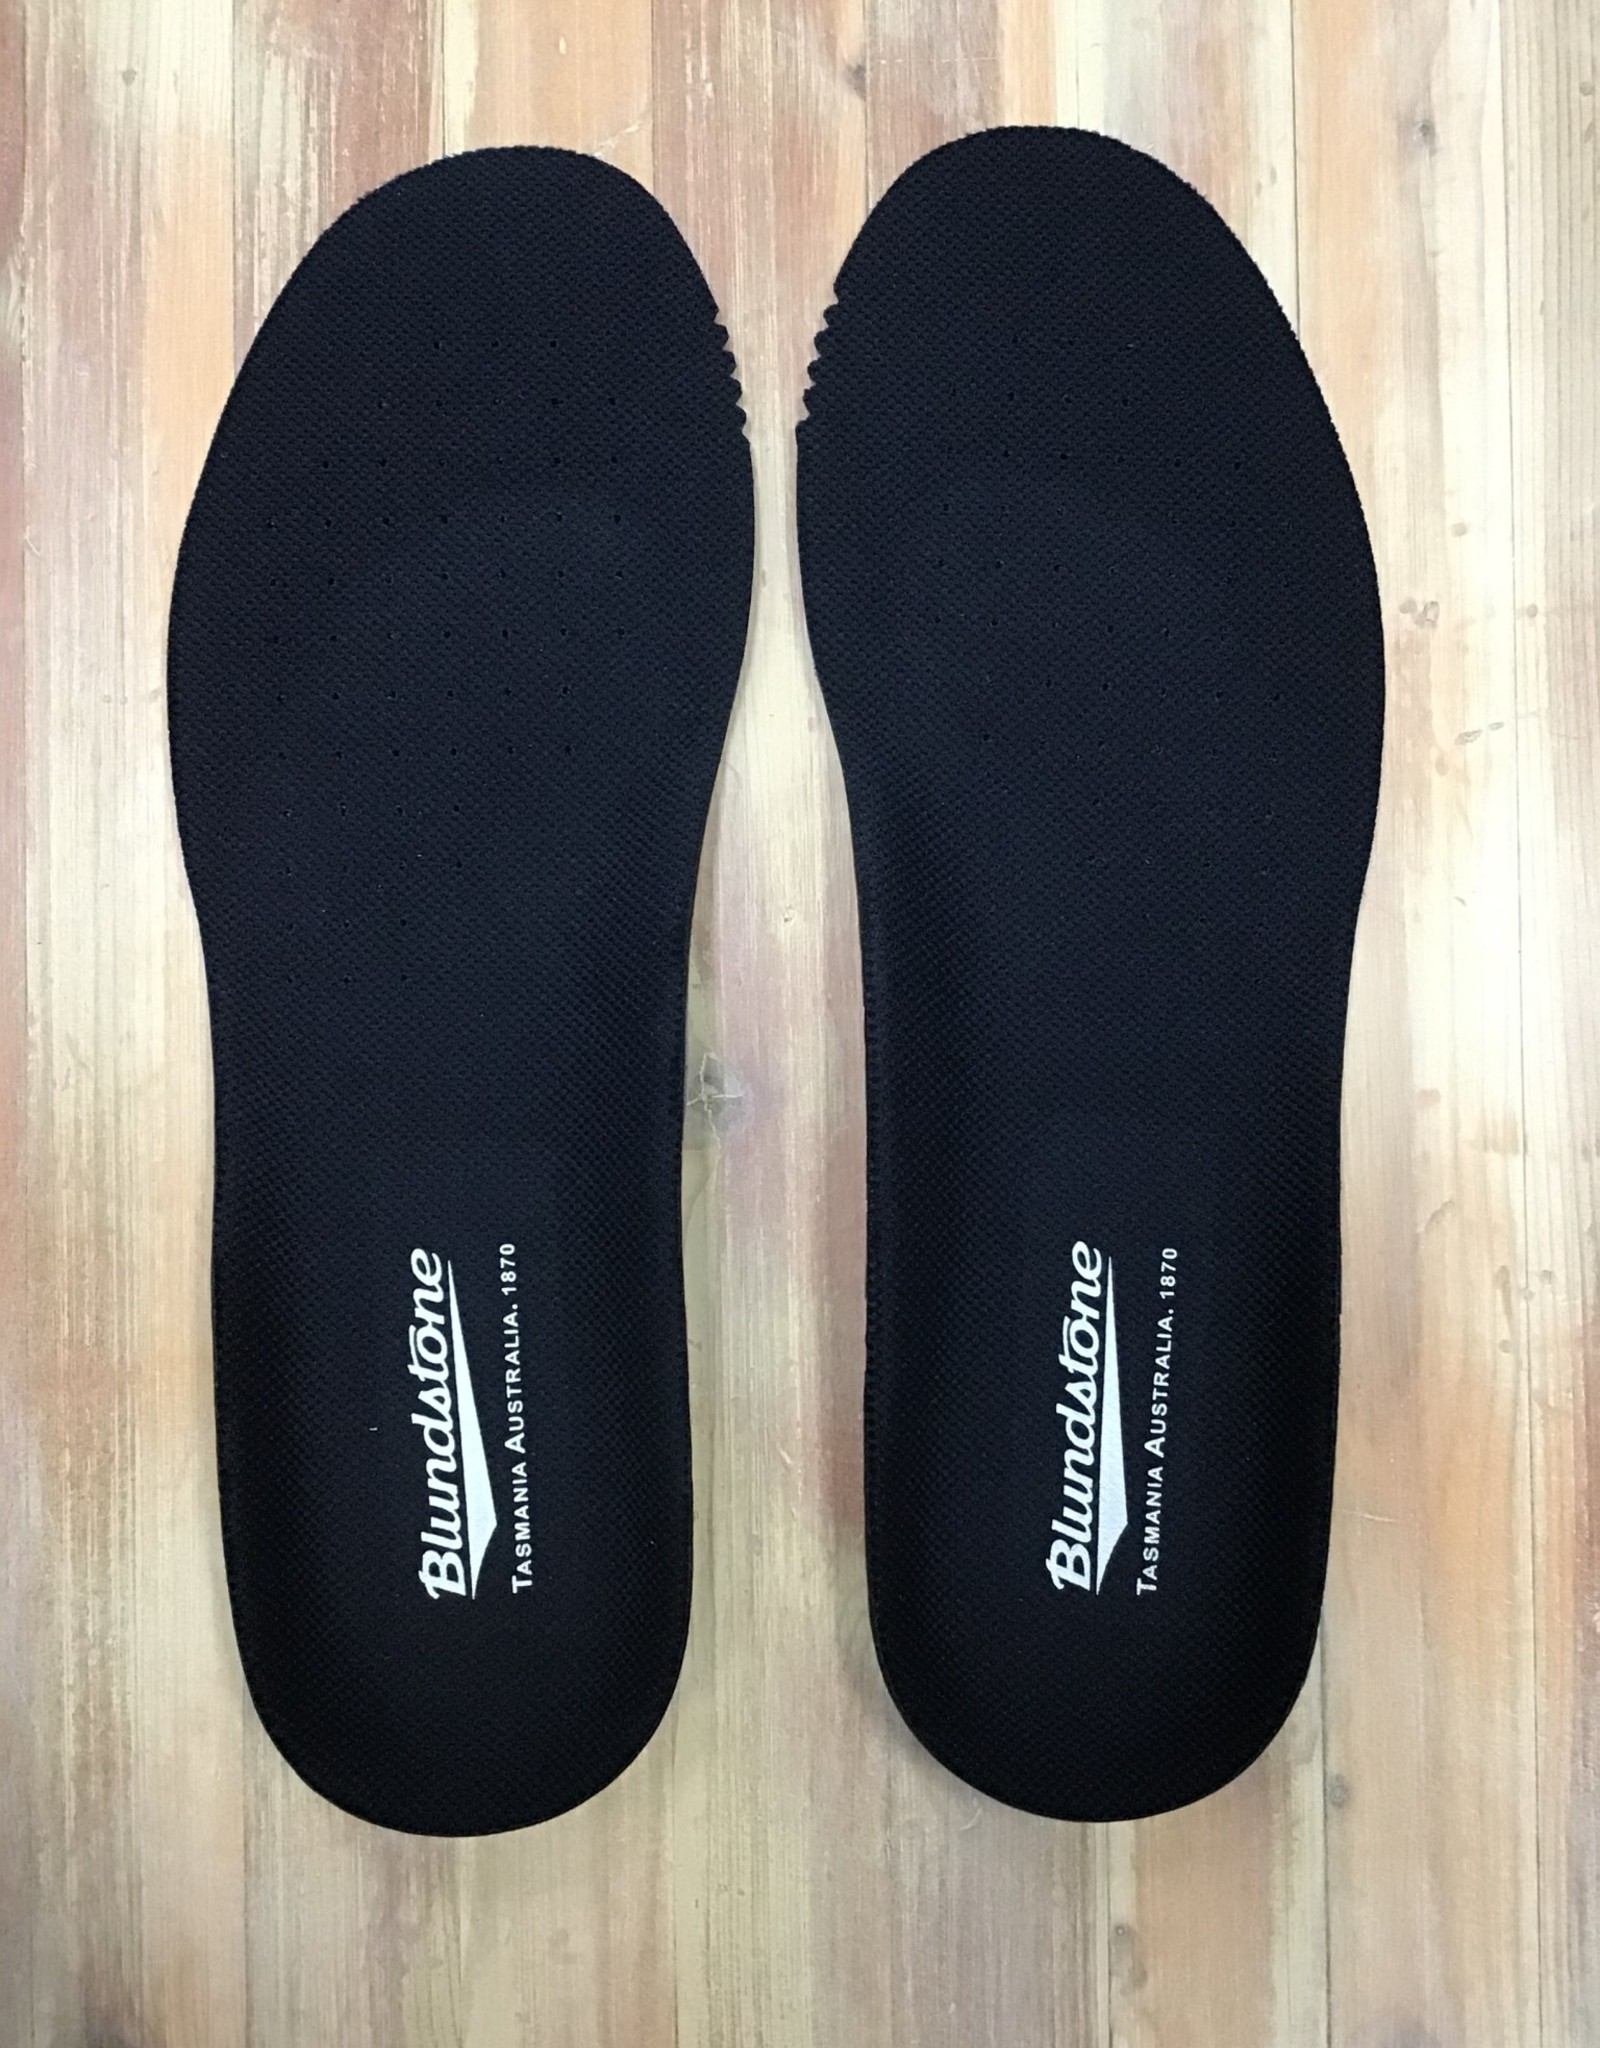 Blundstone Blundstone Comfort Classic Footbed Insoles Unisex